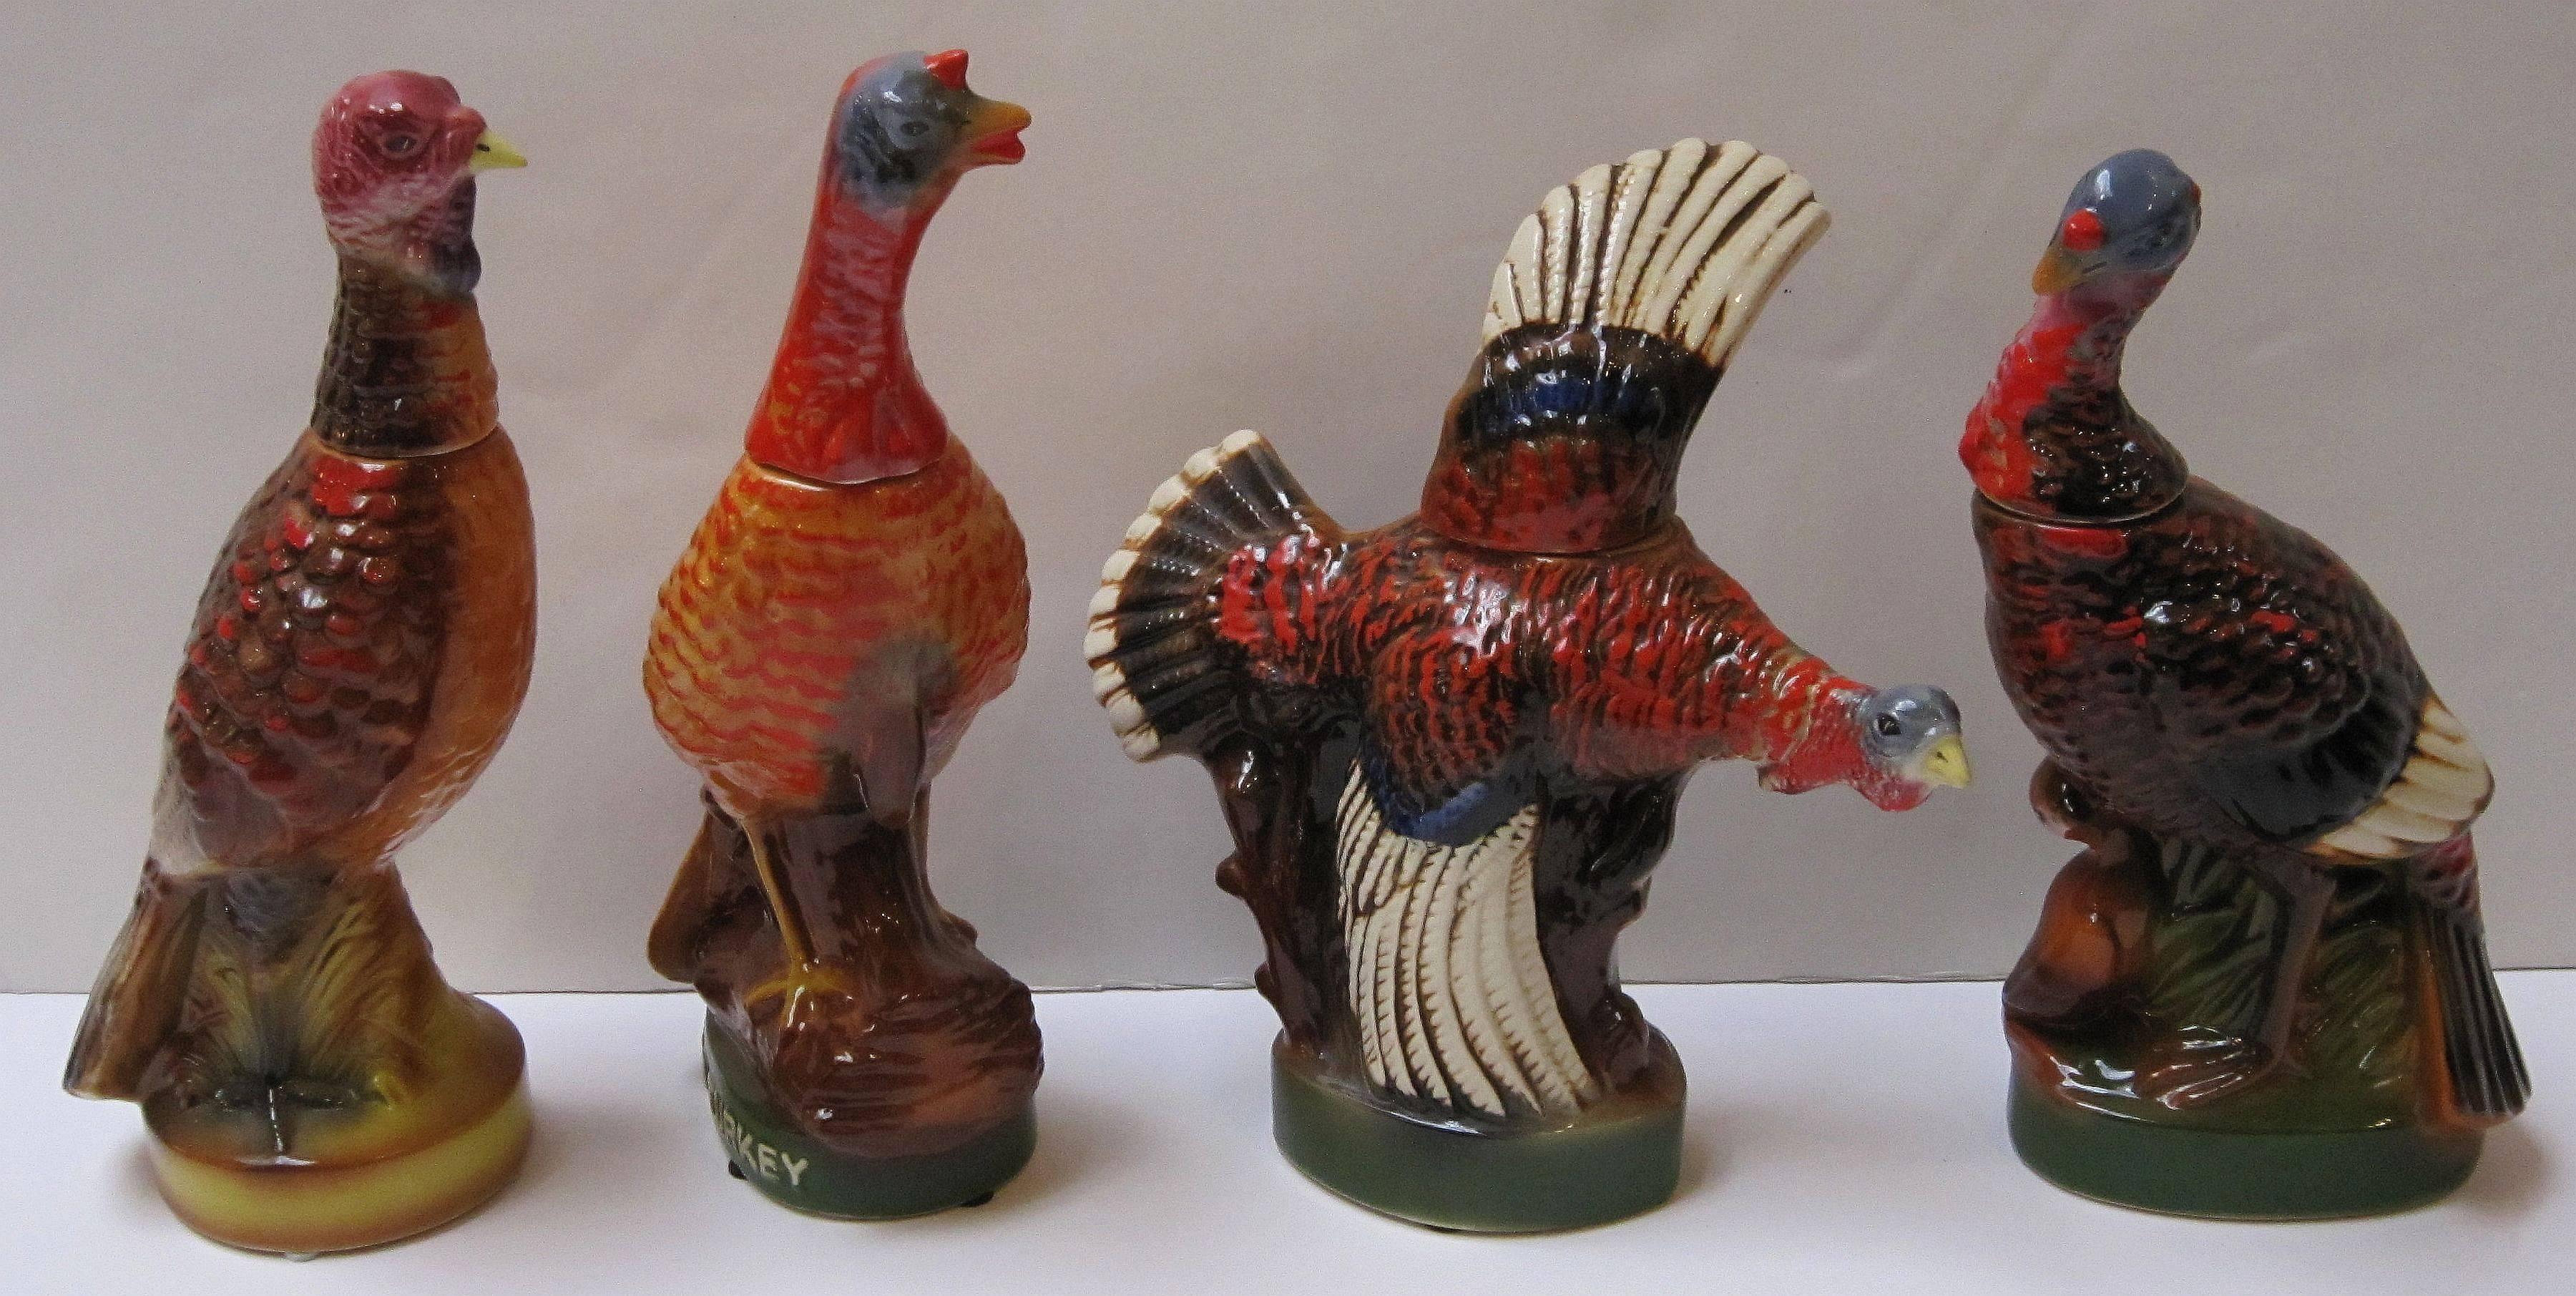 A set of eight large vintage wild Turkey decanters featuring the hard-to-find #one and #two decanters and the popular #three flying and #eight fan-tail decanters.

Marked on base: Austin Nichols ceramic creation liquor bottle, Wild Turkey 101